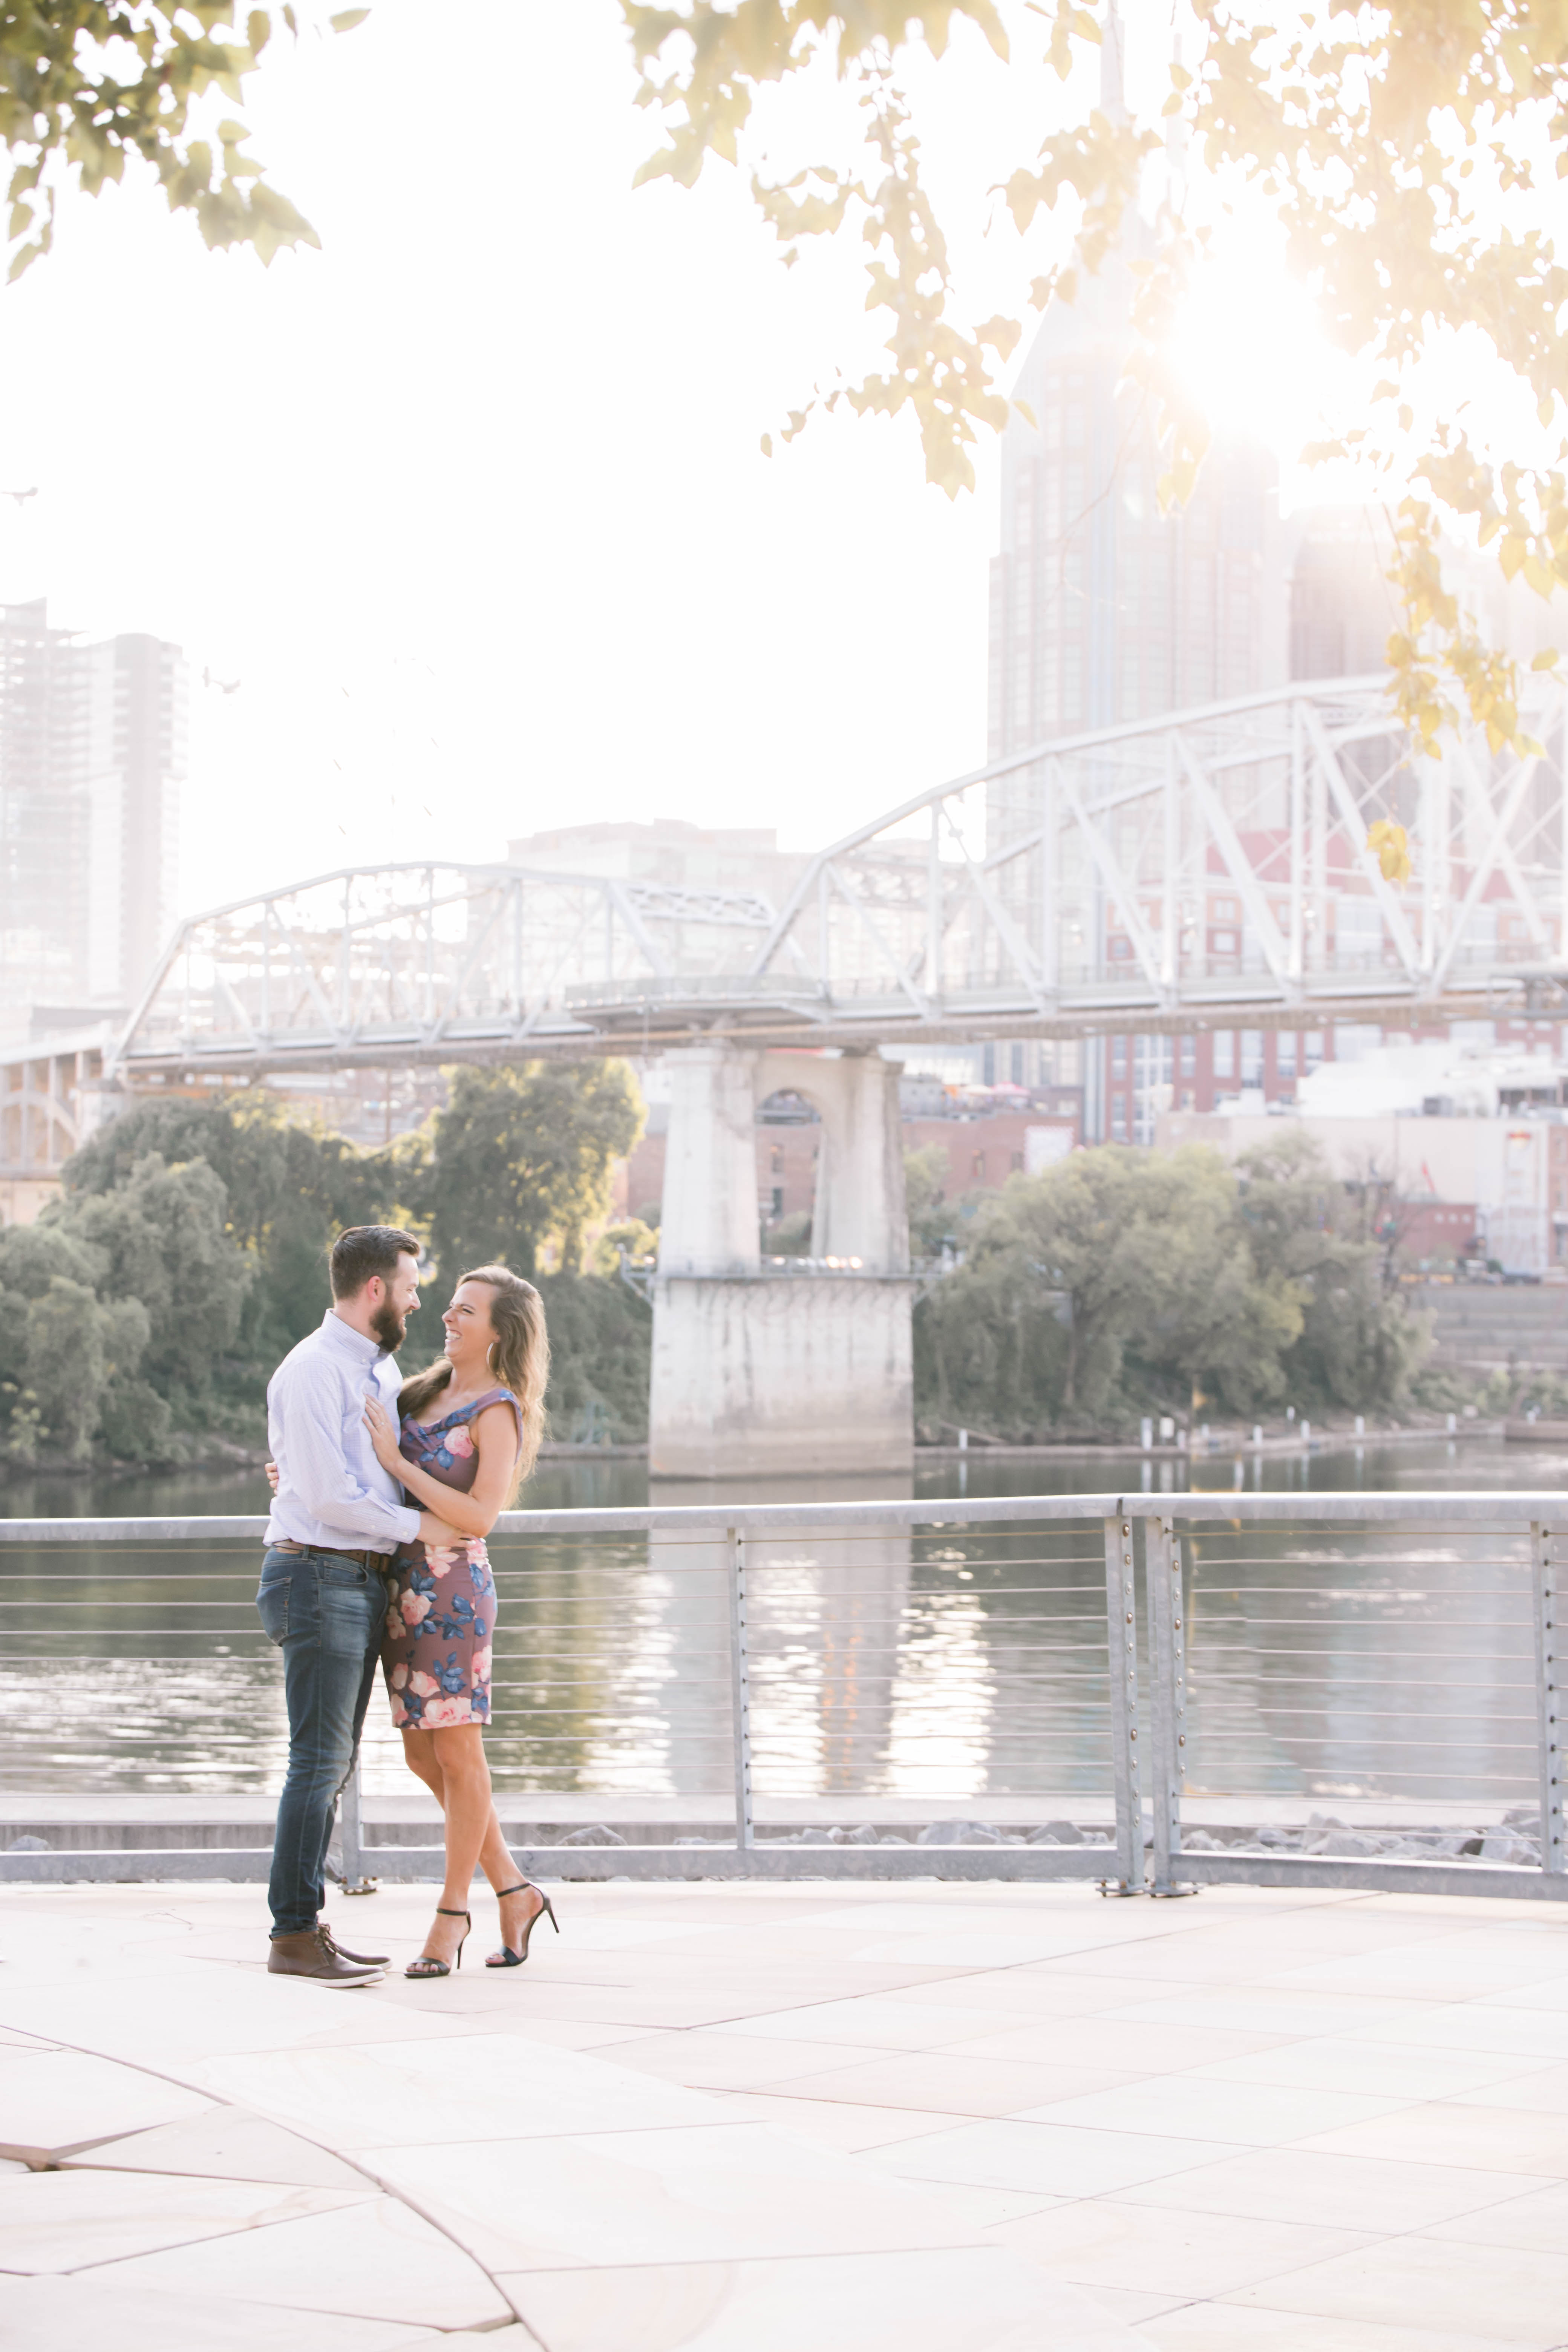 nashville skyline and couple in front of cumberland river